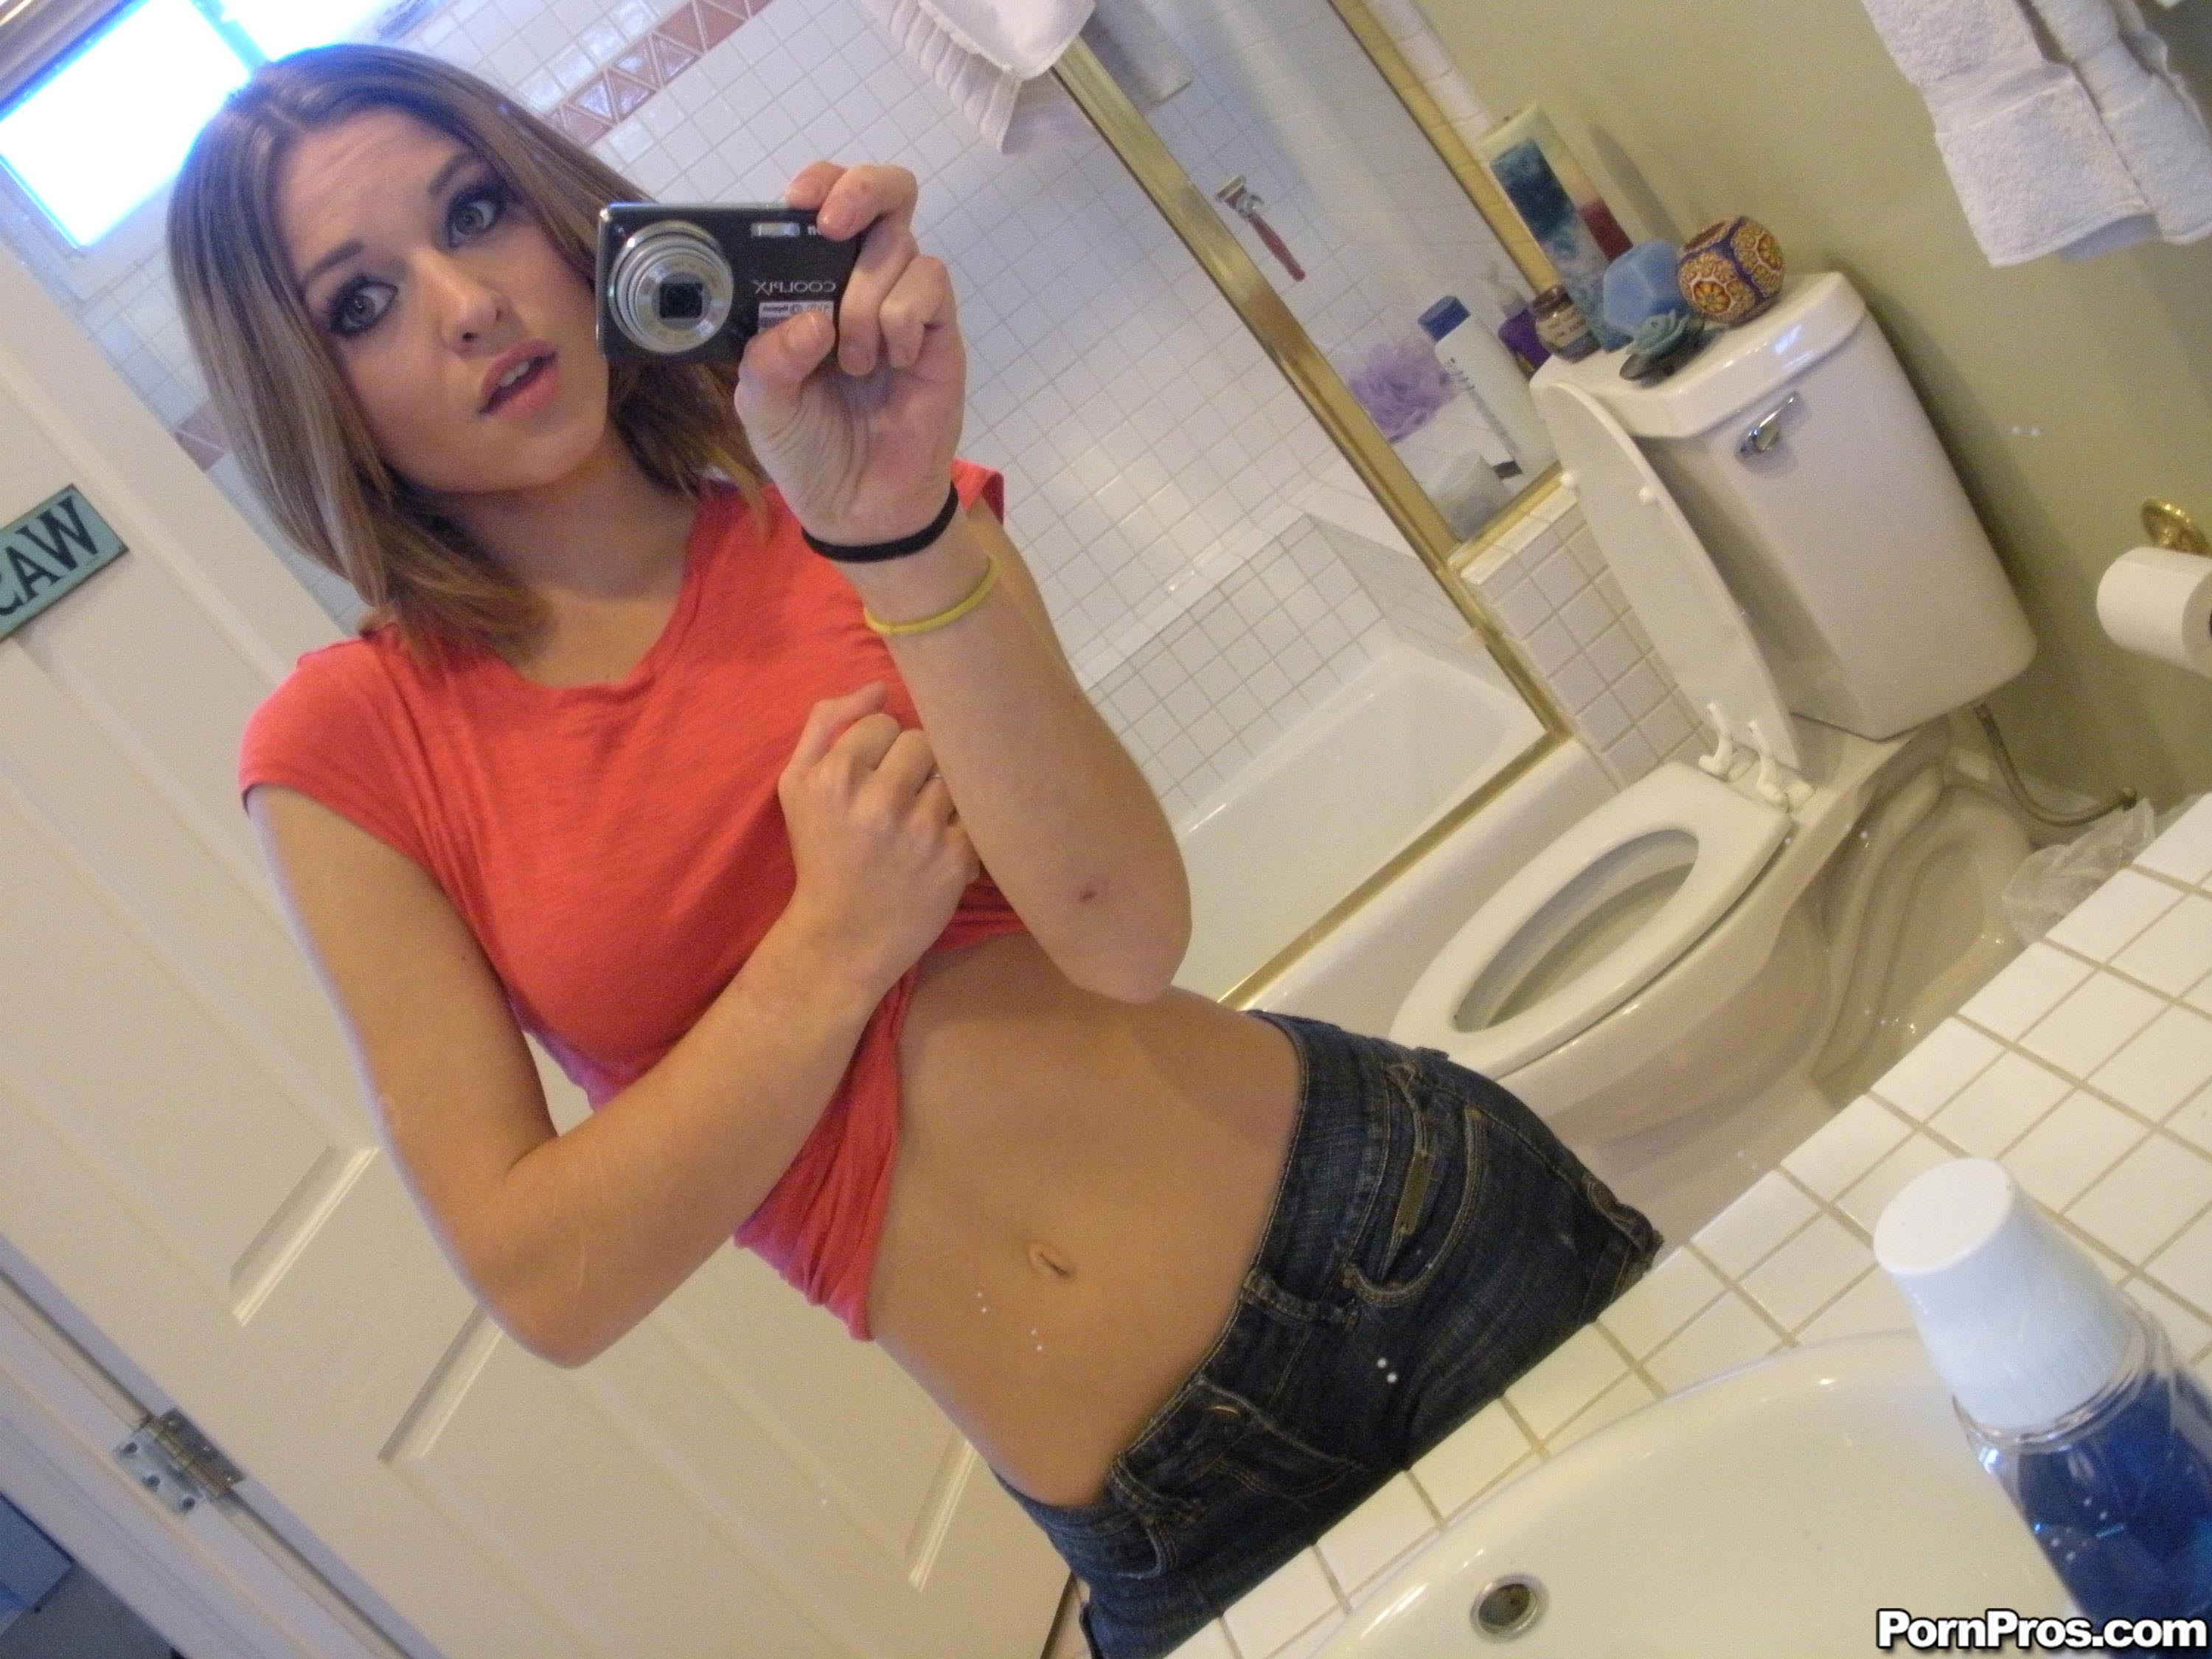 Picture tagged with: Skinny, Brunette, Kasey Chase, PornPros.com, American, Selfie, Small Tits, Tummy